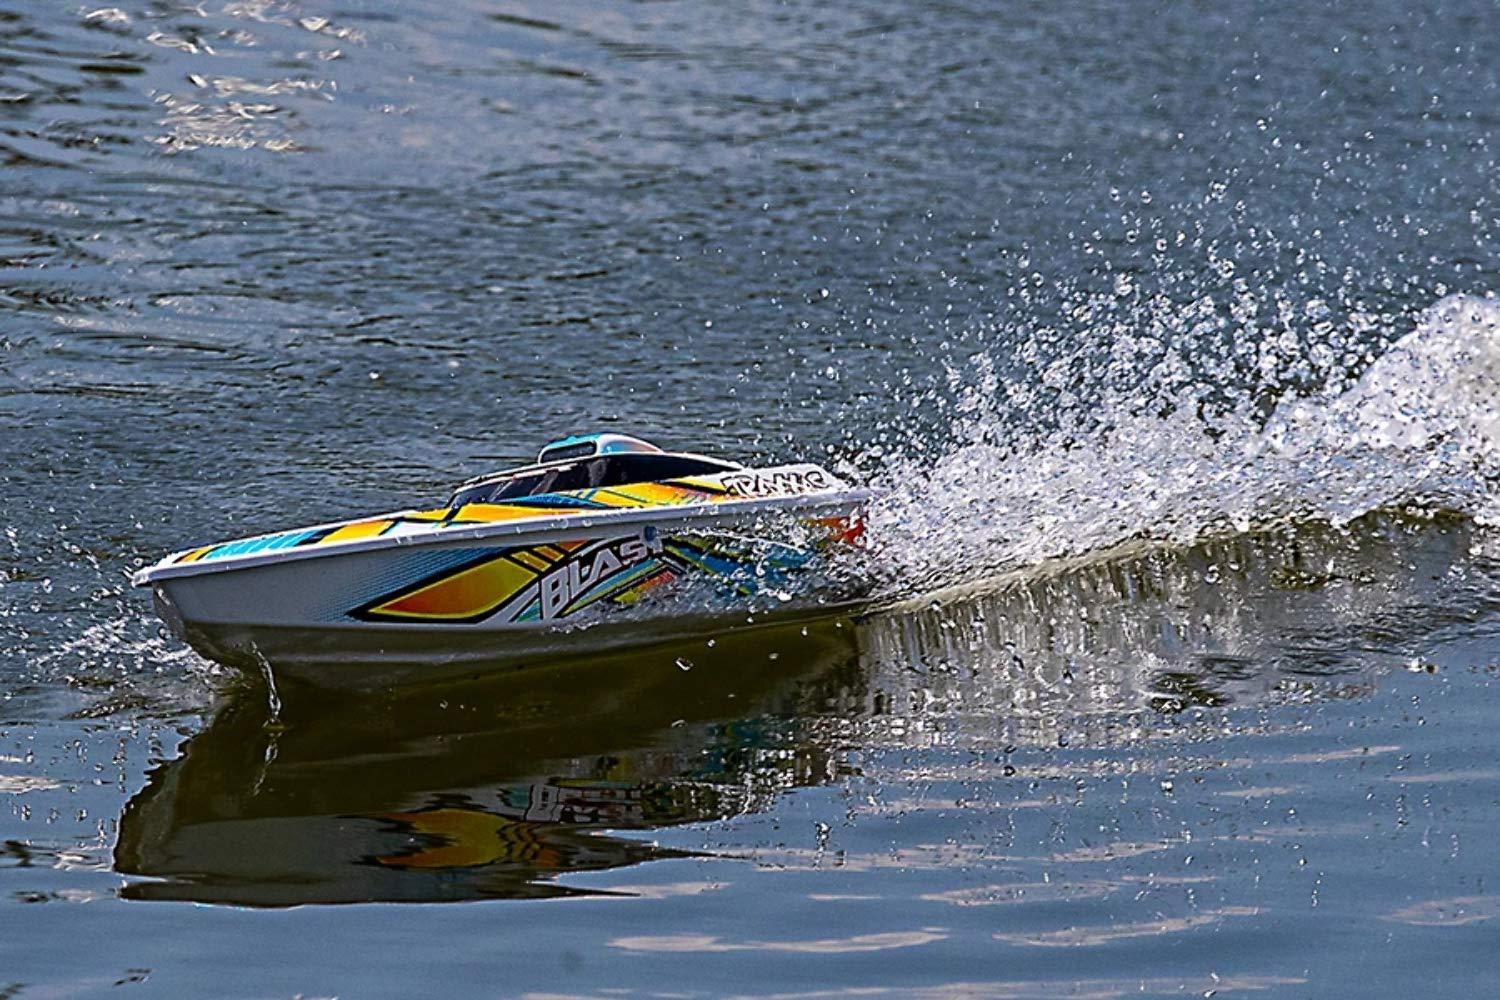 Traxxas 38104 1 Blast High Performance Race Boat Rtr:  'Impressive Speed and Maneuverability'*